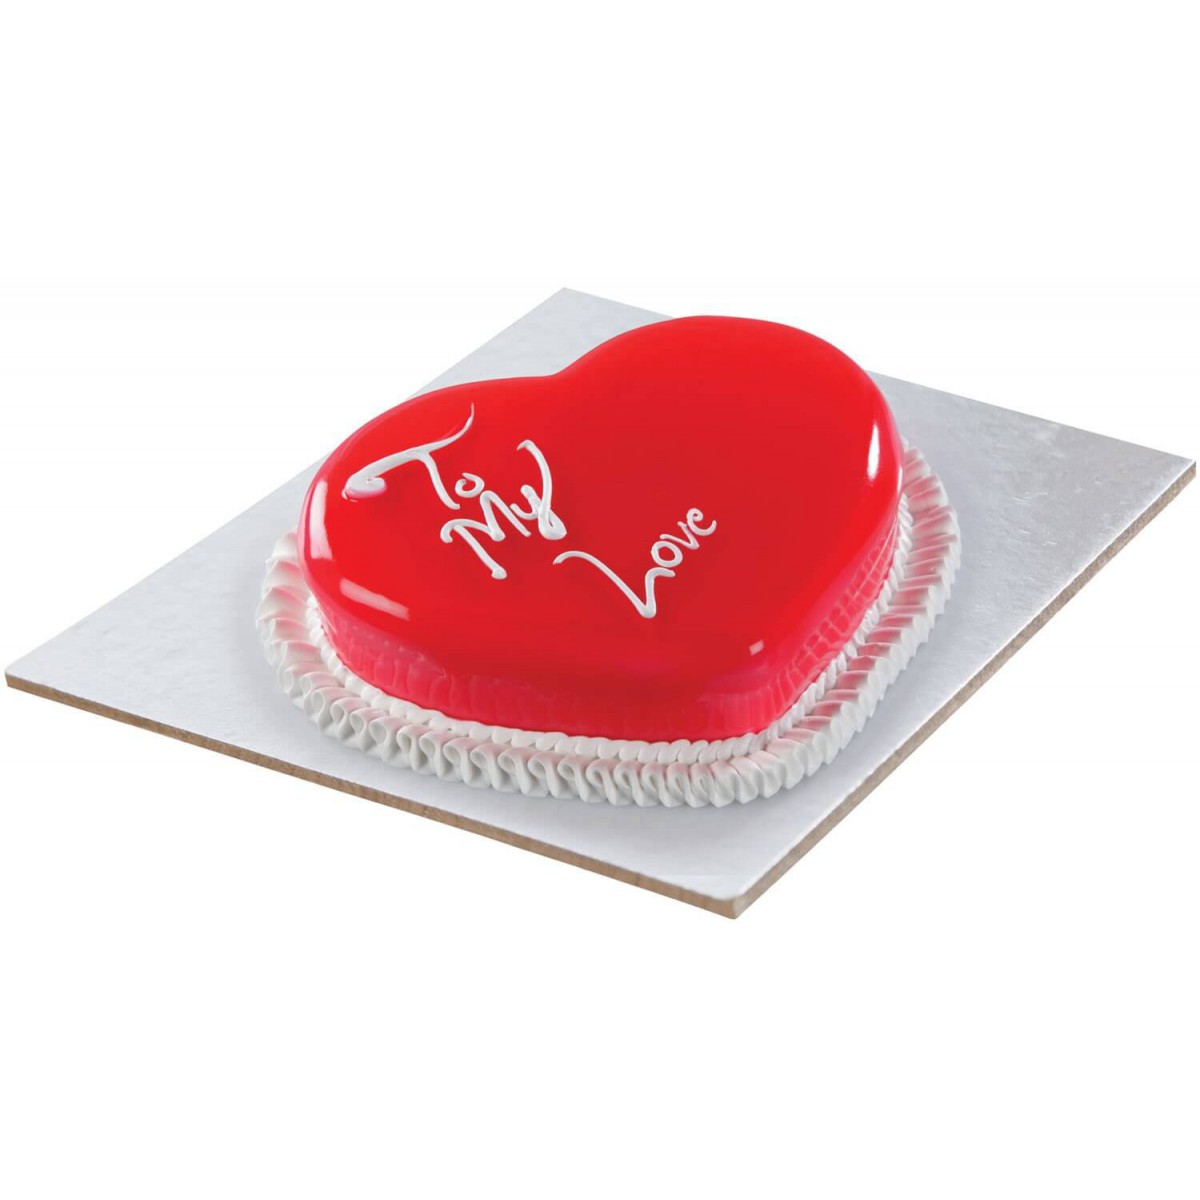 White & Red Heart Shape Cake | Just Cakes